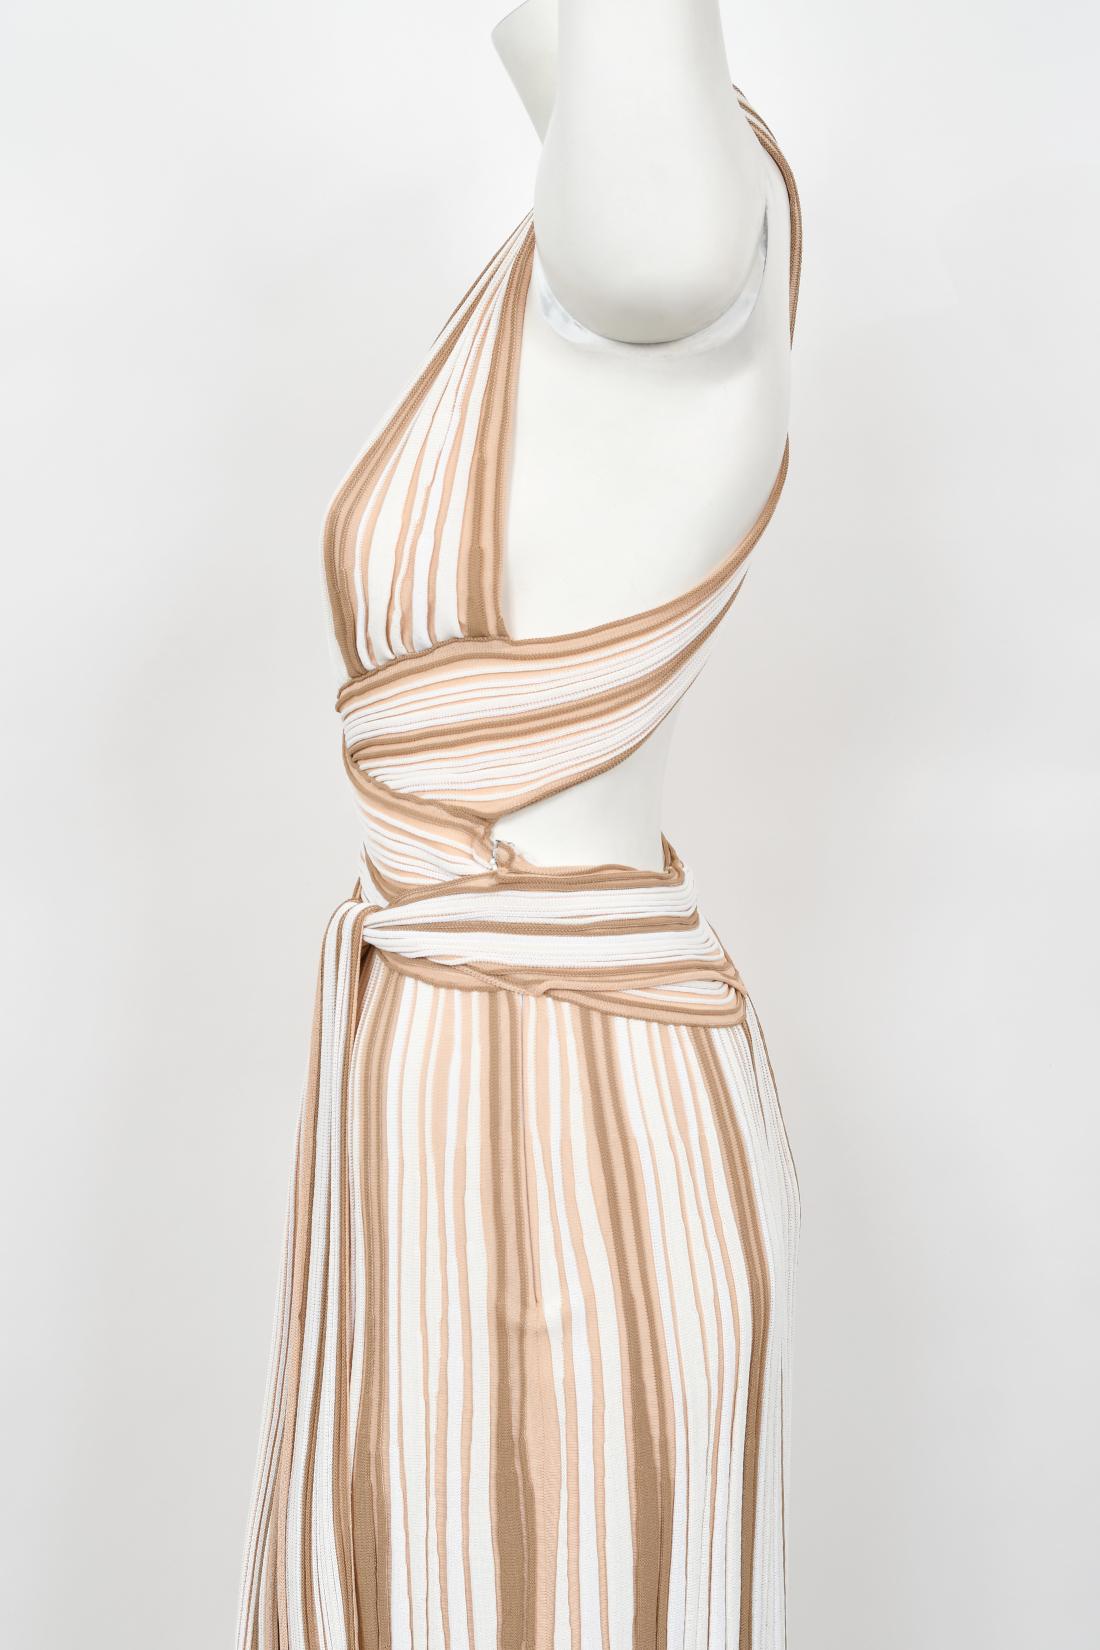 2002 Christian Dior by John Galliano Striped Stretch Knit Low-Plunge Maxi Dress For Sale 5